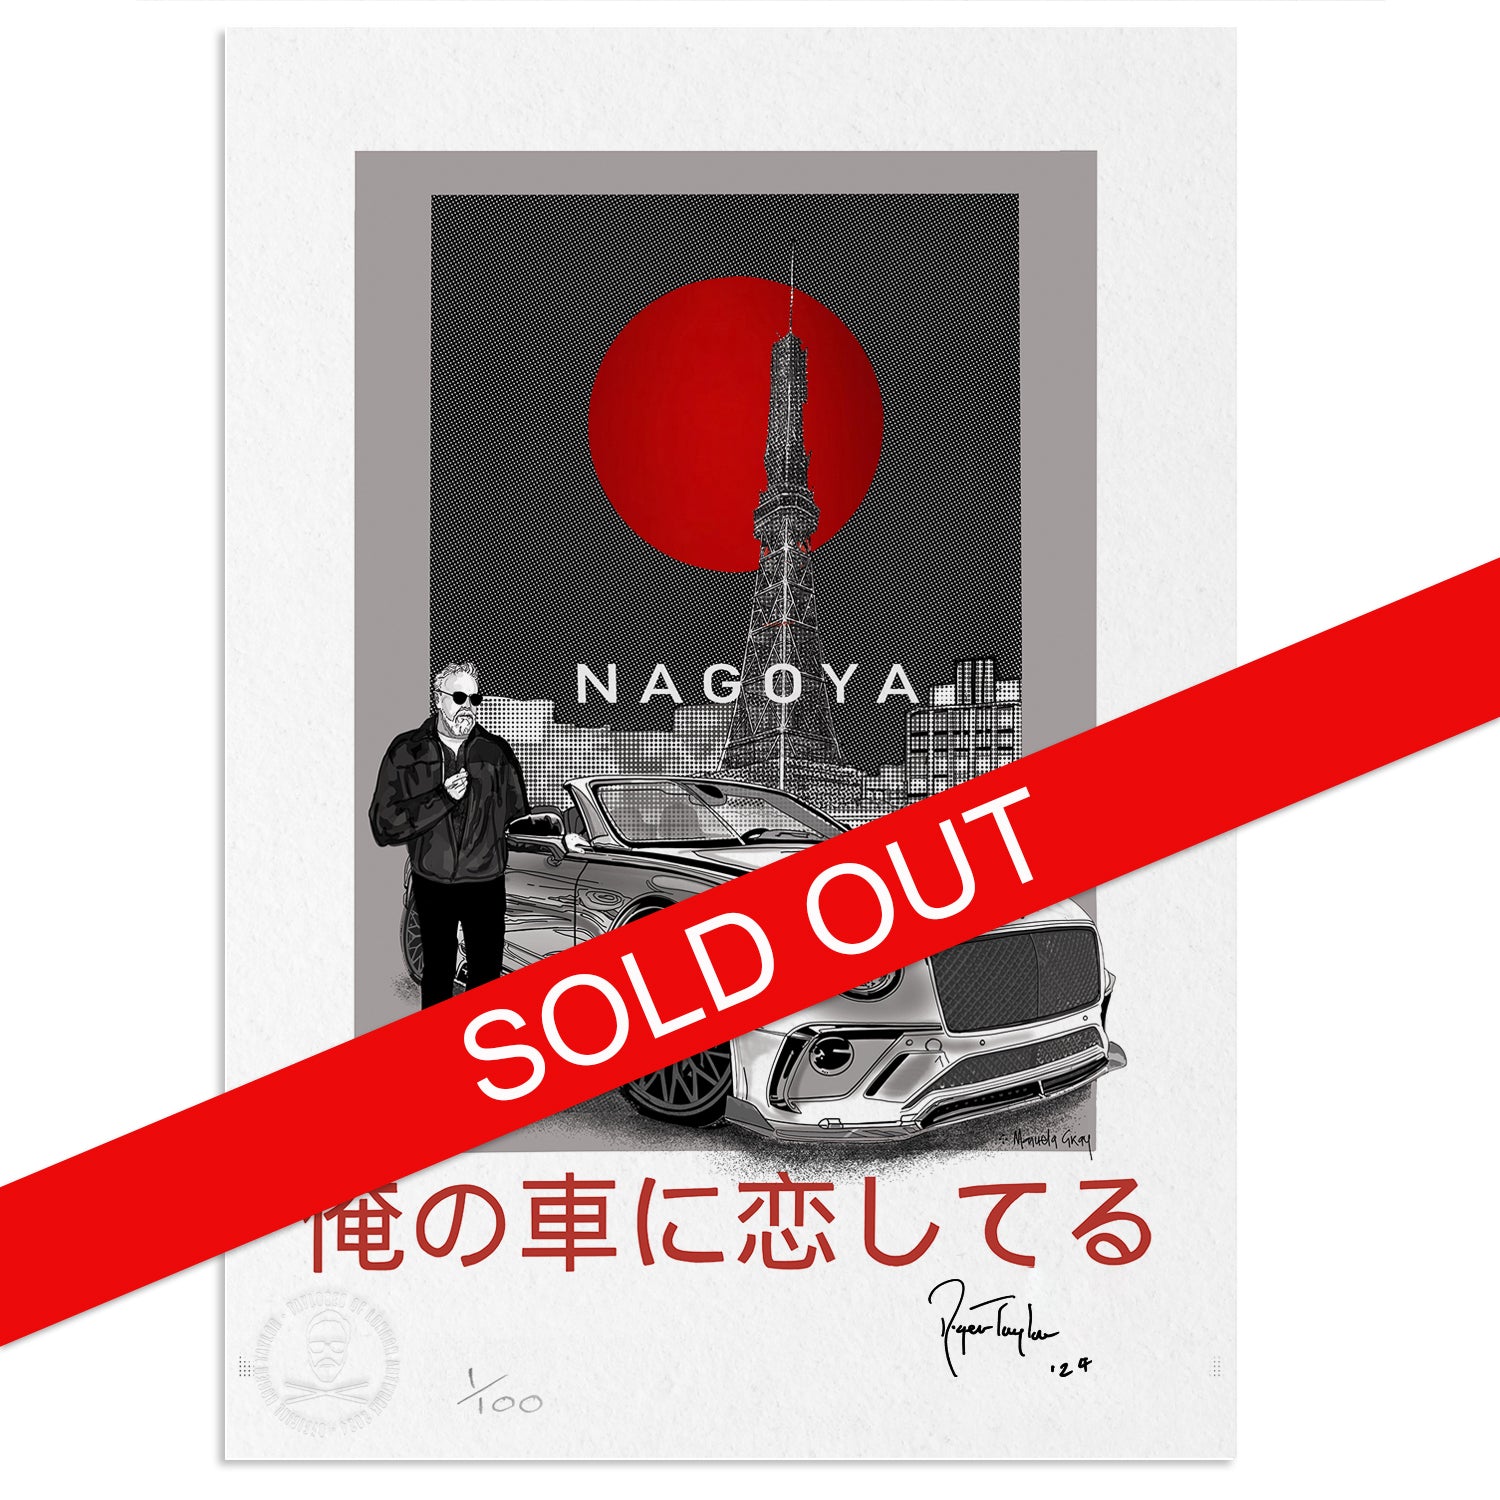 Limited Edition Japanese A1 Signed Collectors Lithograph 'NAGOYA'